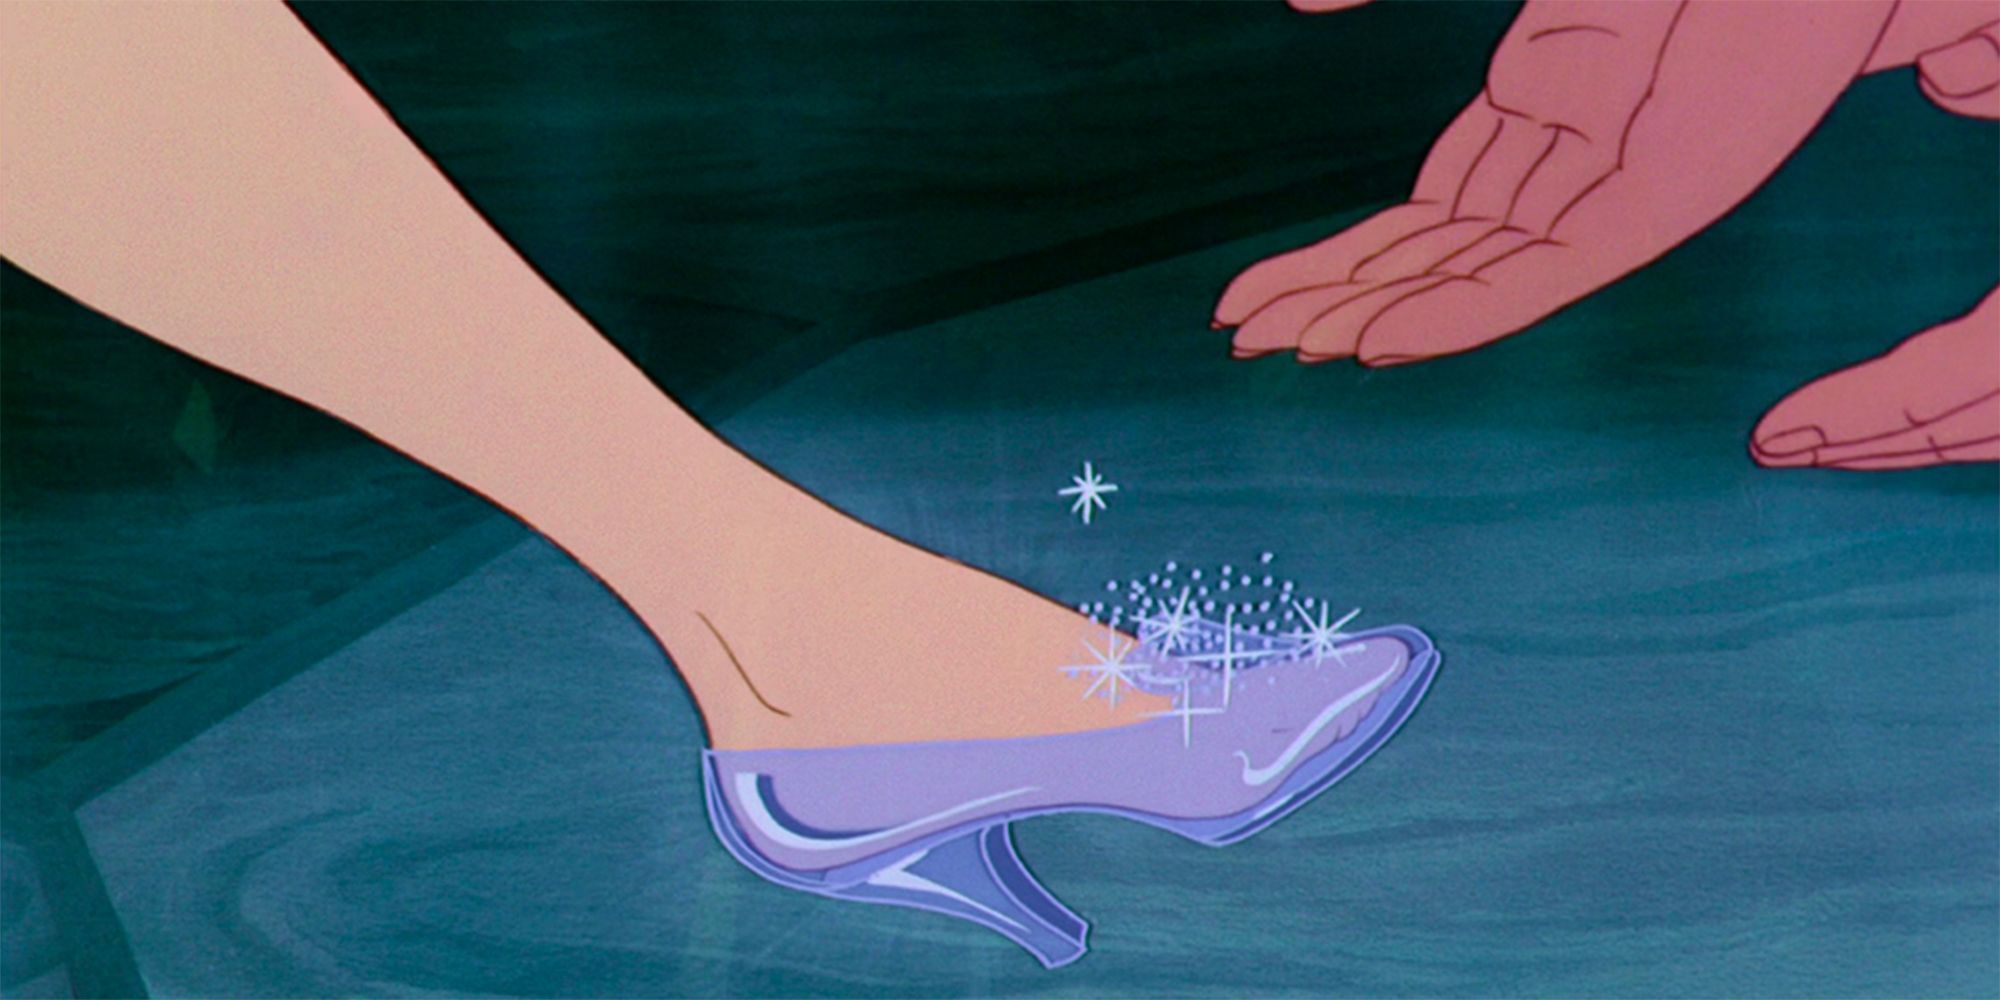 The Longer You Think About Cinderella’s Glass Shoe, The More Ridiculous It Gets